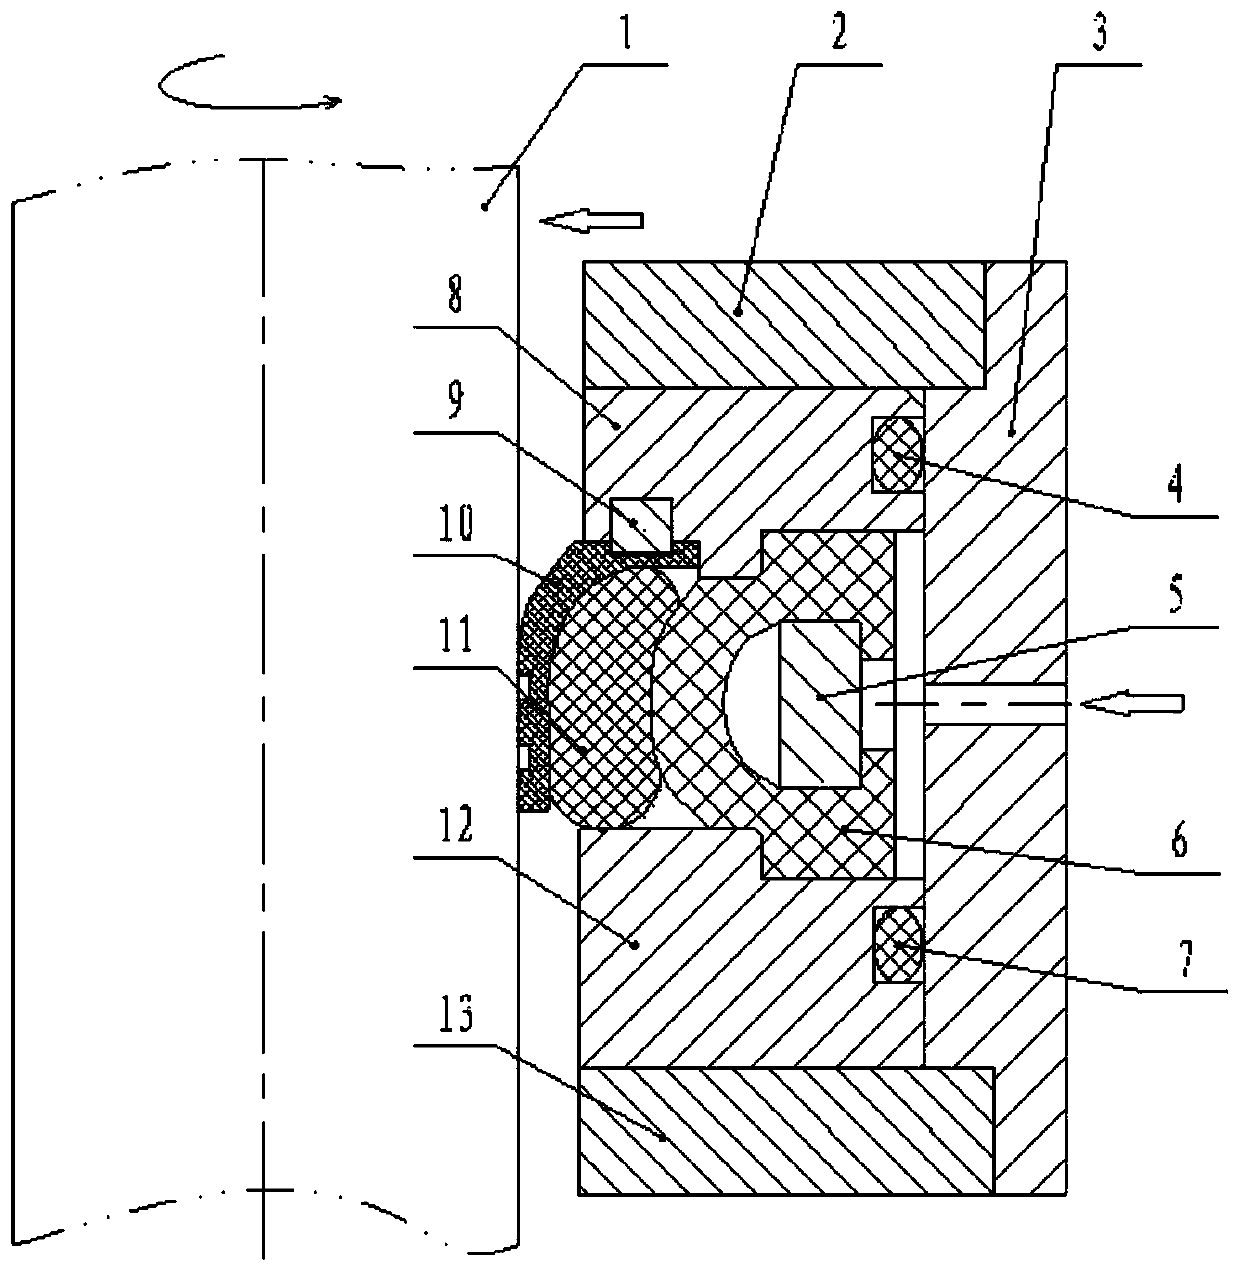 Eccentric rotation following sealing device for rotary blowout preventer